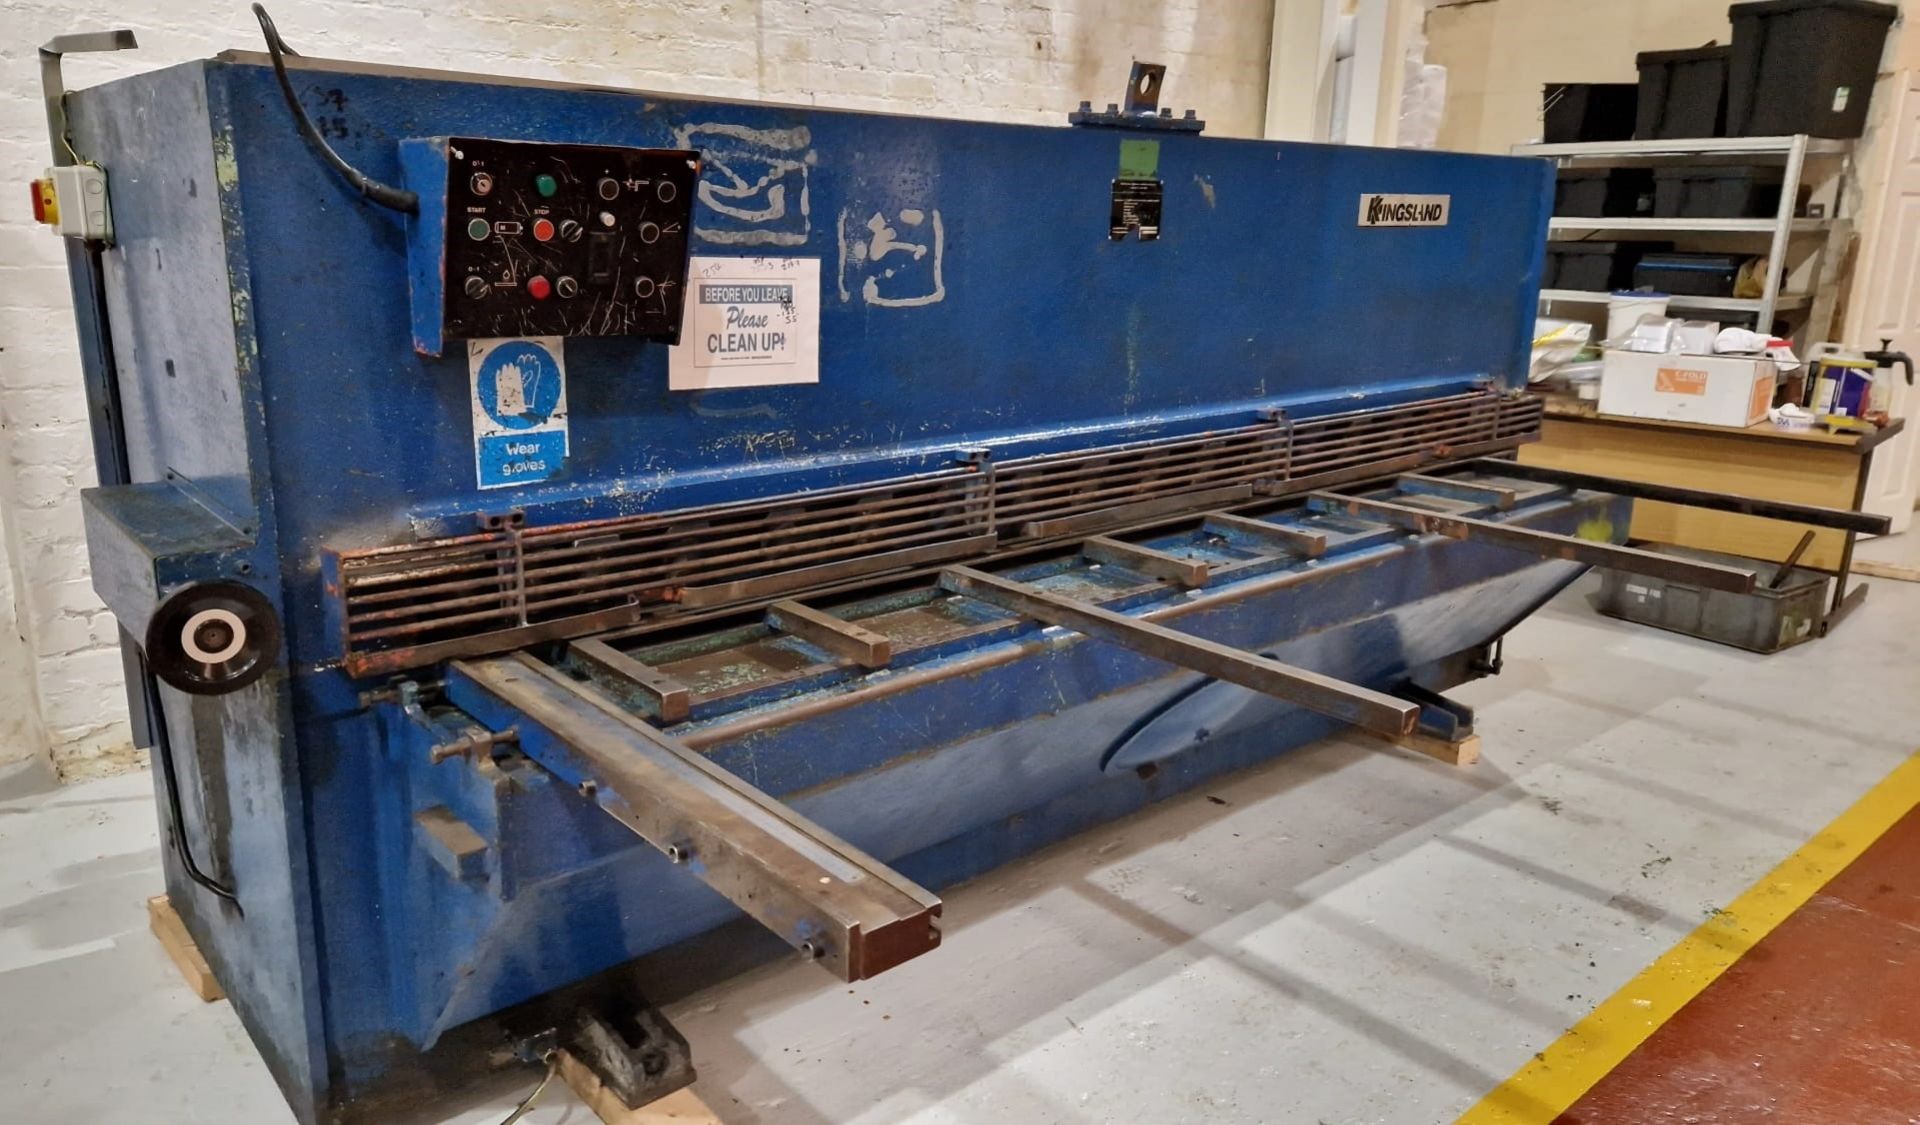 Kingsland 3000 x 6mm Hydraulic Guillotine - Image 2 of 5